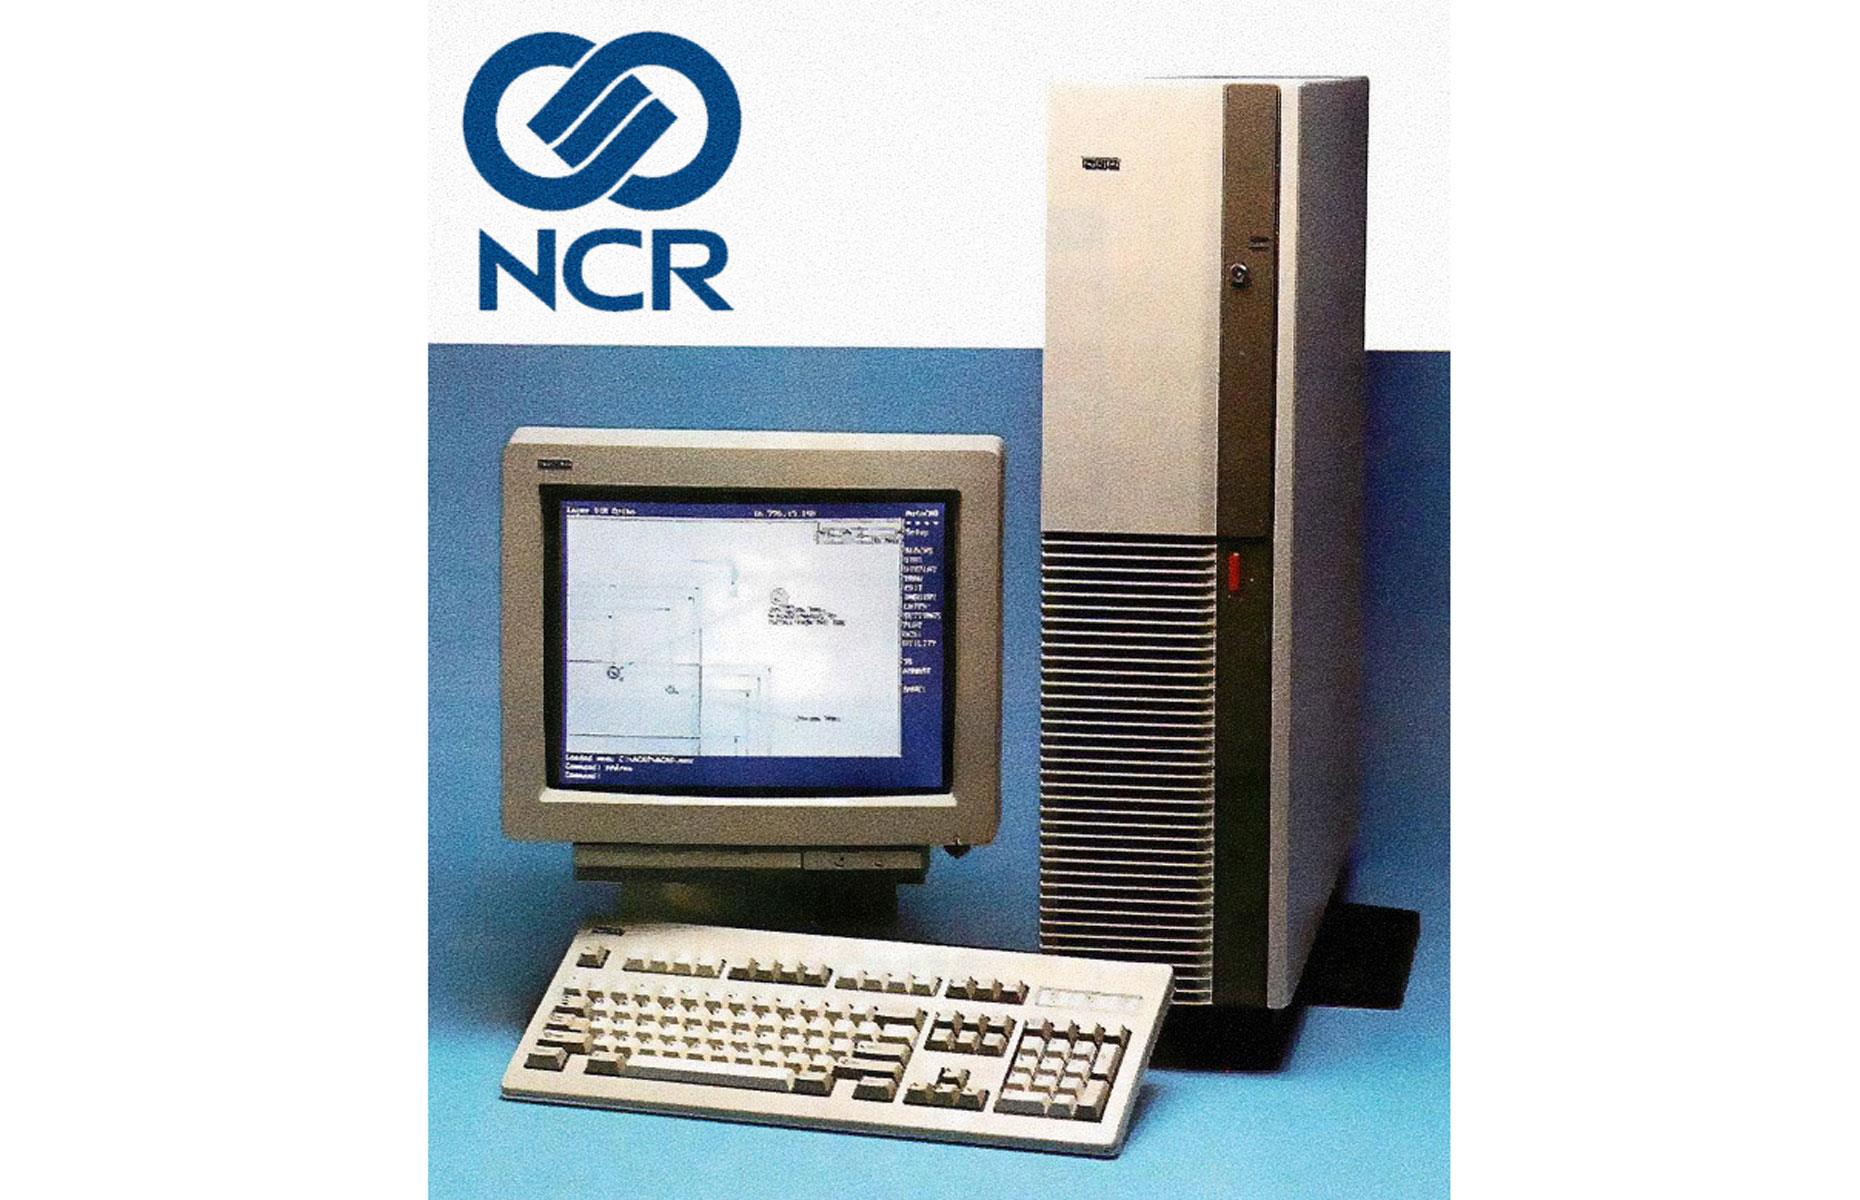 AT&T & NCR in 1991